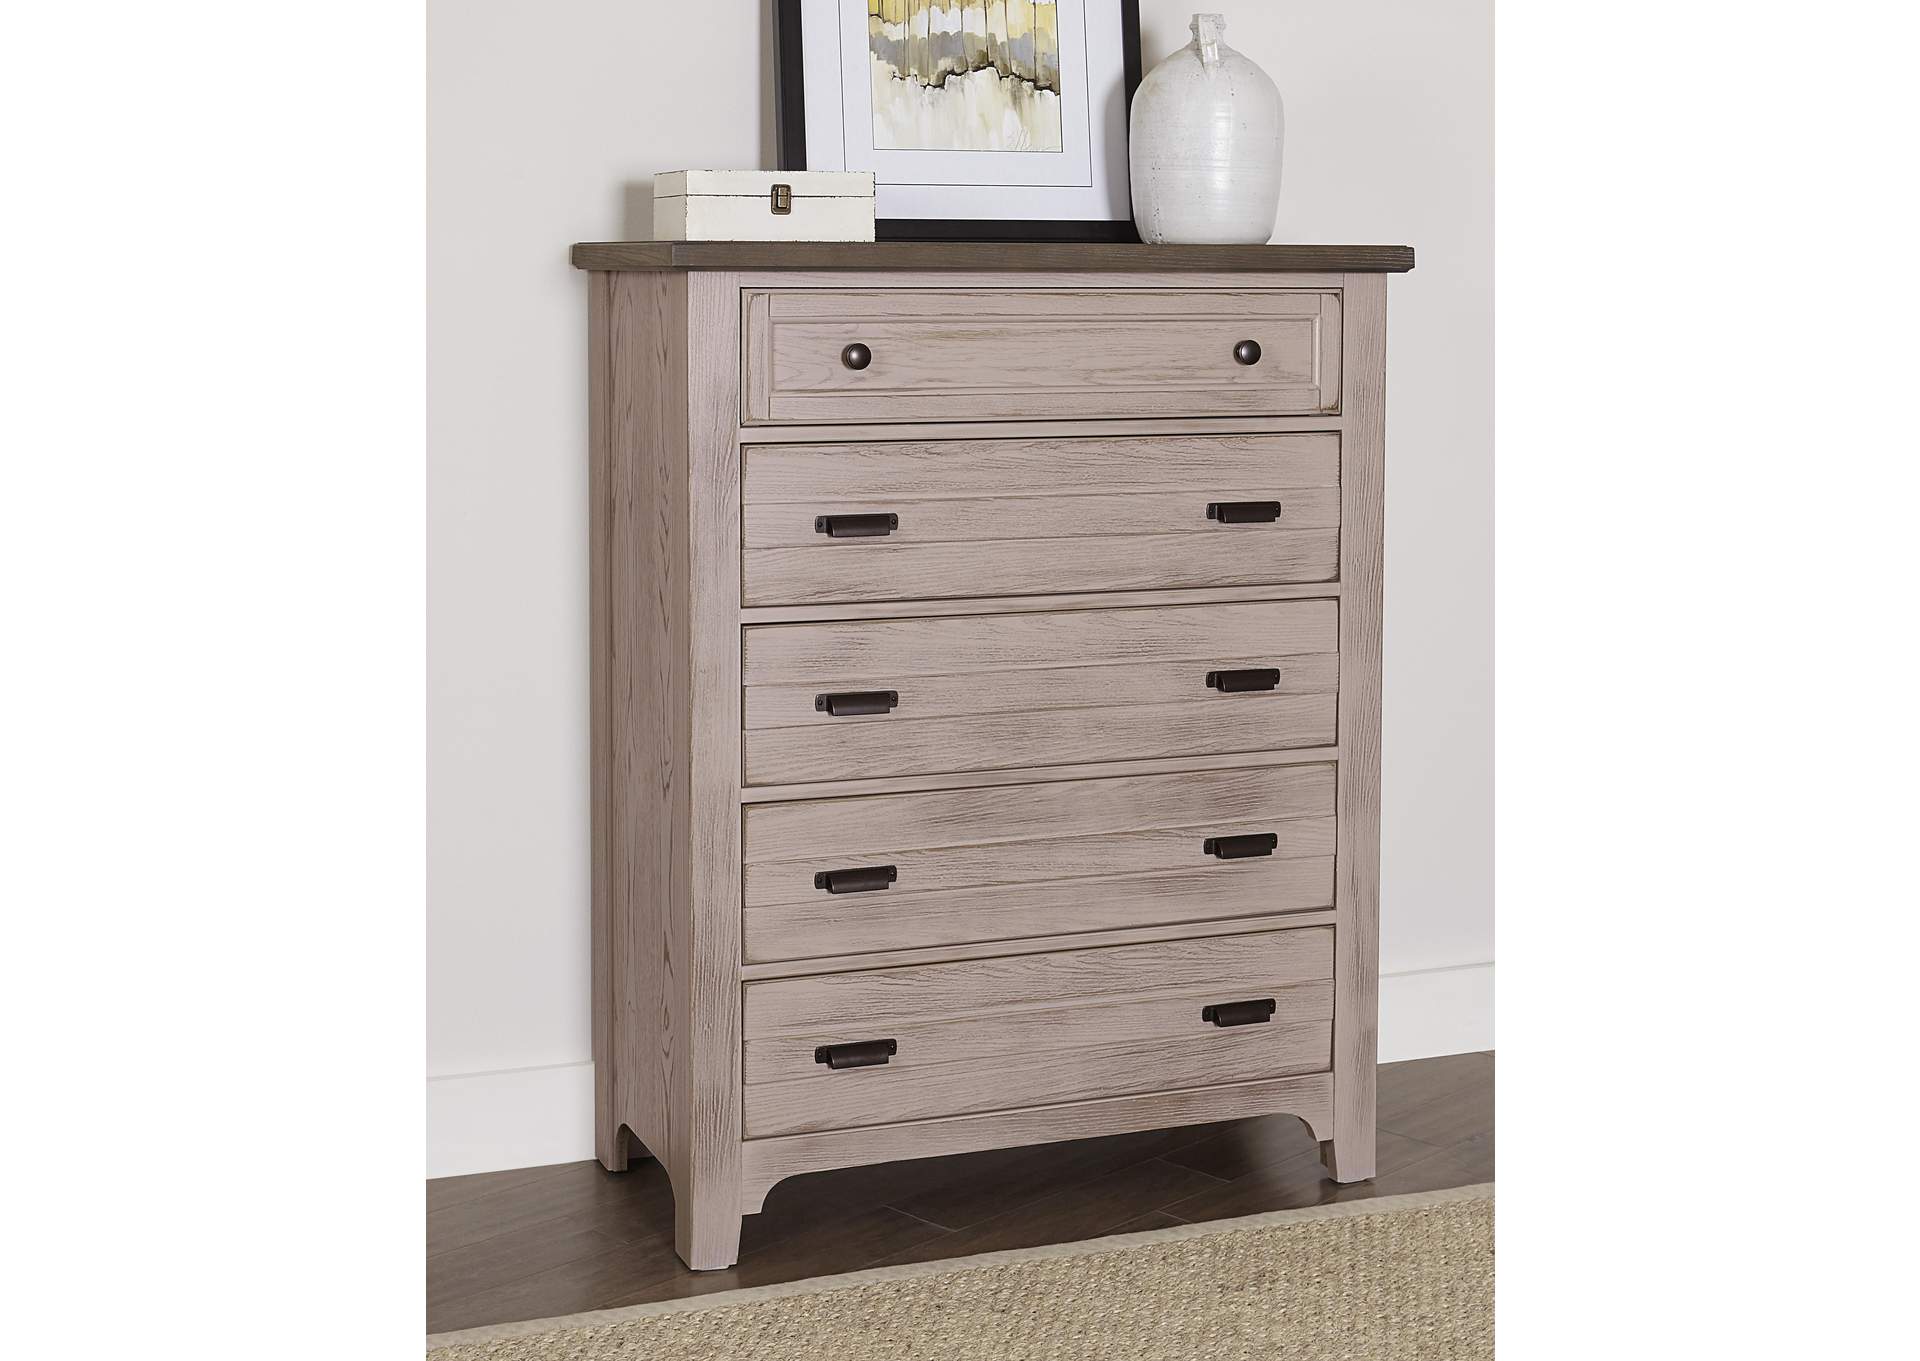 Bungalow Dover Grey with Folkstone Top Chest - 5 Drawer,Vaughan-Bassett